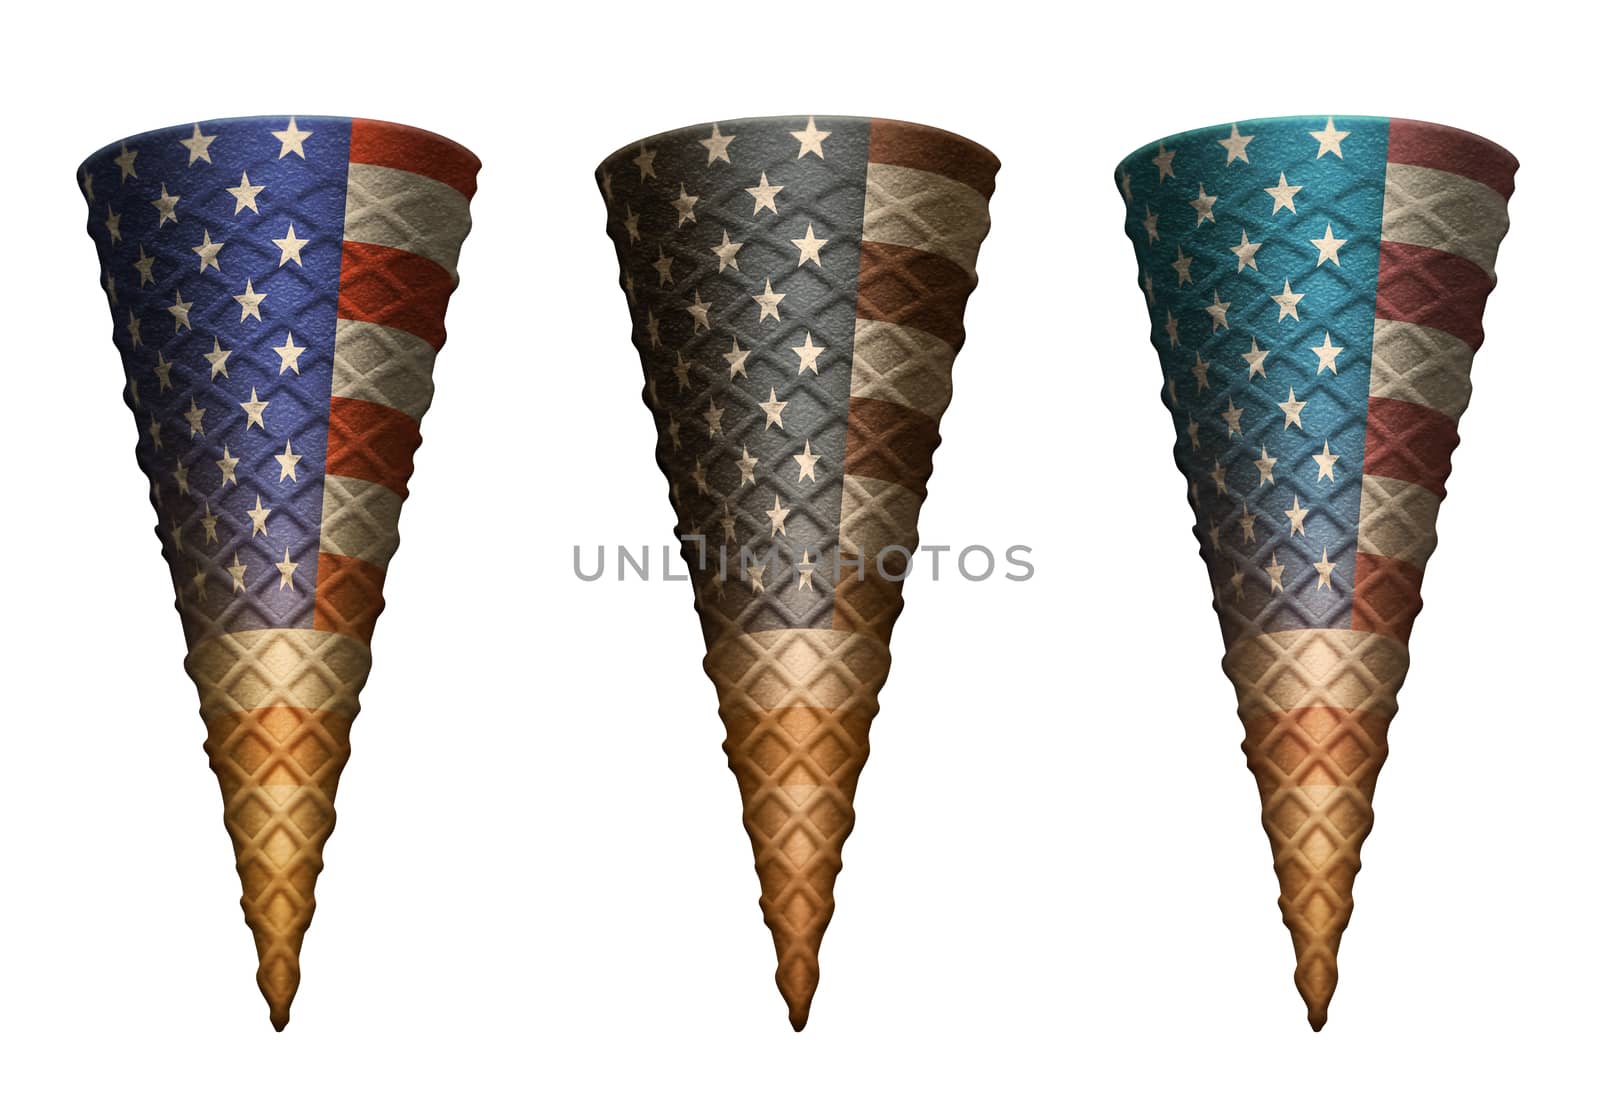 Patriotic or political empty ice cream cones. Includes a clipping path to add your own contents.